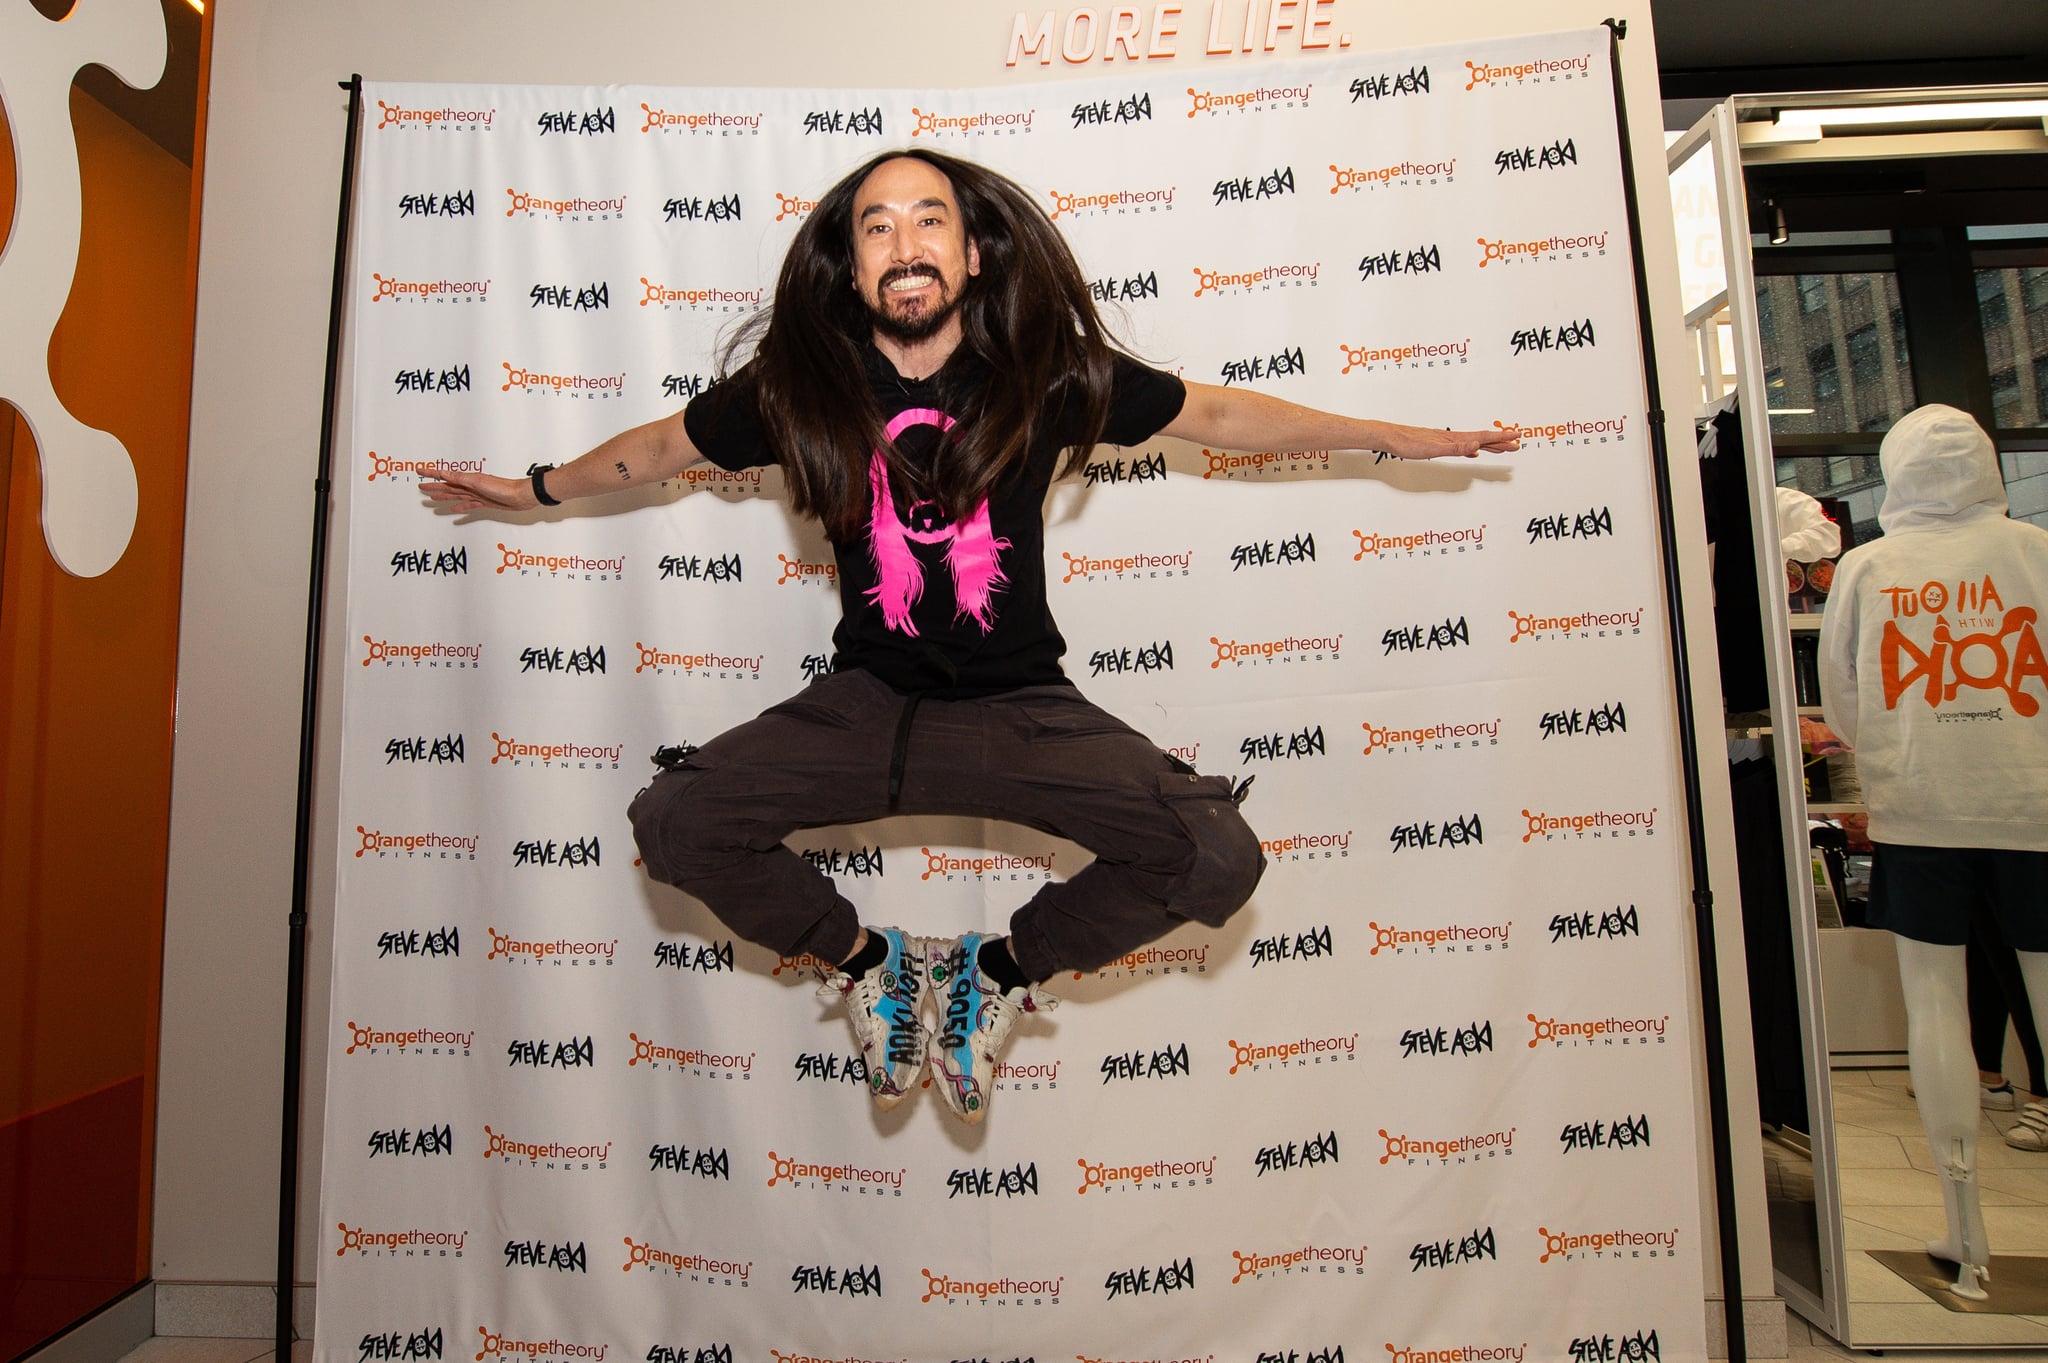 Steve Aoki electrifies the crowd with his signature jump during Orangetheory Fitness' exclusive Chief Music Officer launch event in New York City on Wednesday, March 9, 2022. (Photo by Diane Bondareff/Invision for Orangetheory Fitness/AP Images)